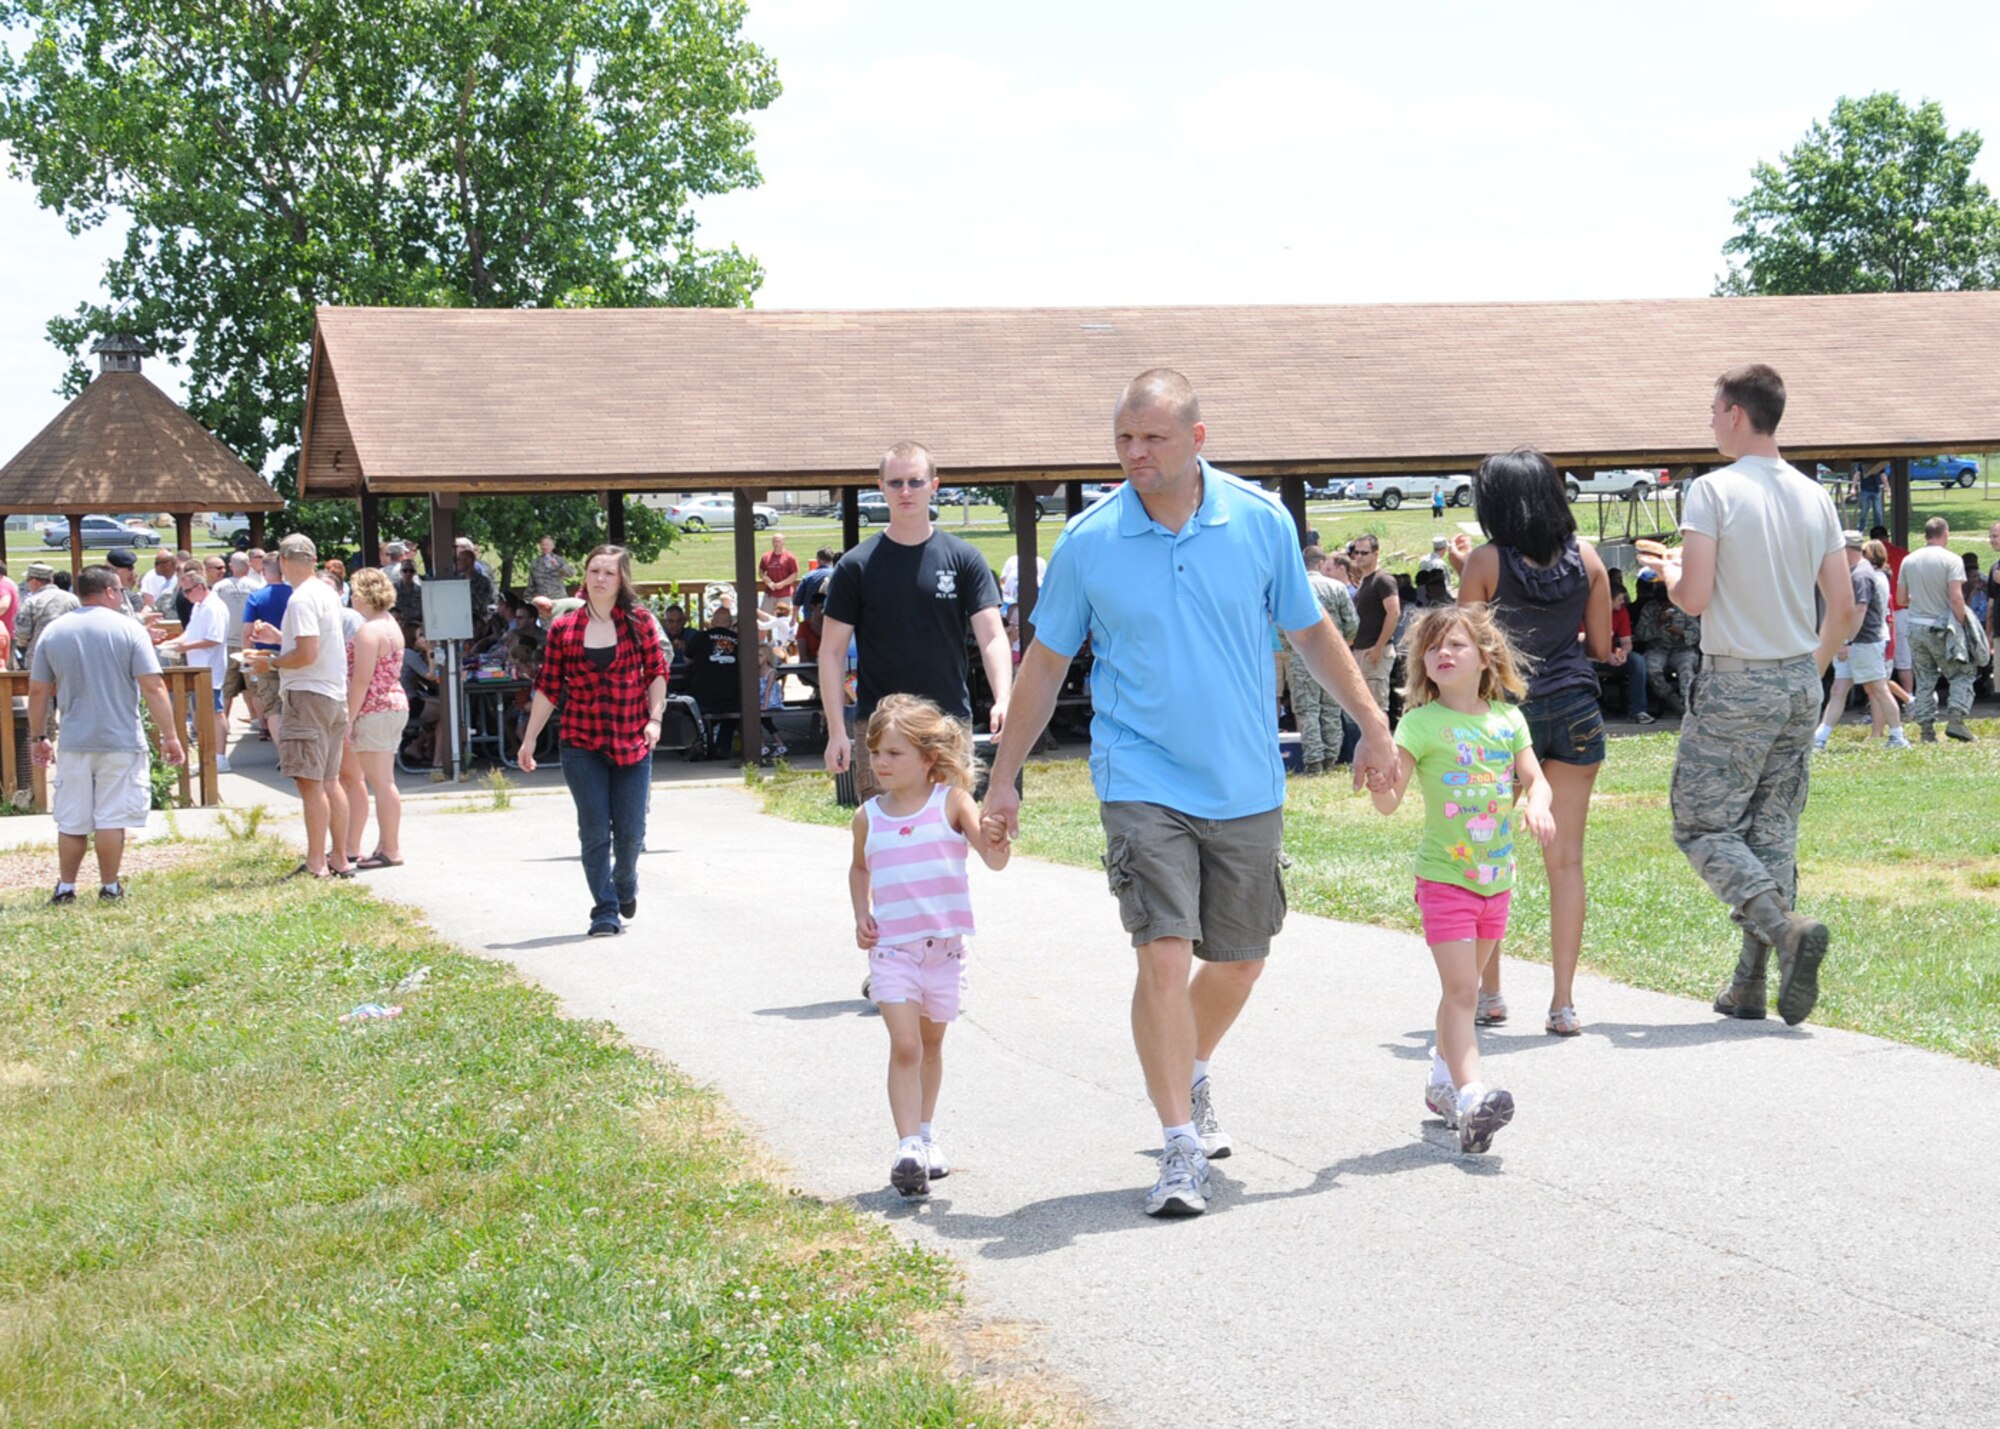 Current and retired members of the 131st Bomb Wing and their families
participate in Wing Family Day at Ike Skelton Park, Whiteman AFB, MO, June
11.  (Photo by Master Sgt, Mary-Dale Amison)
